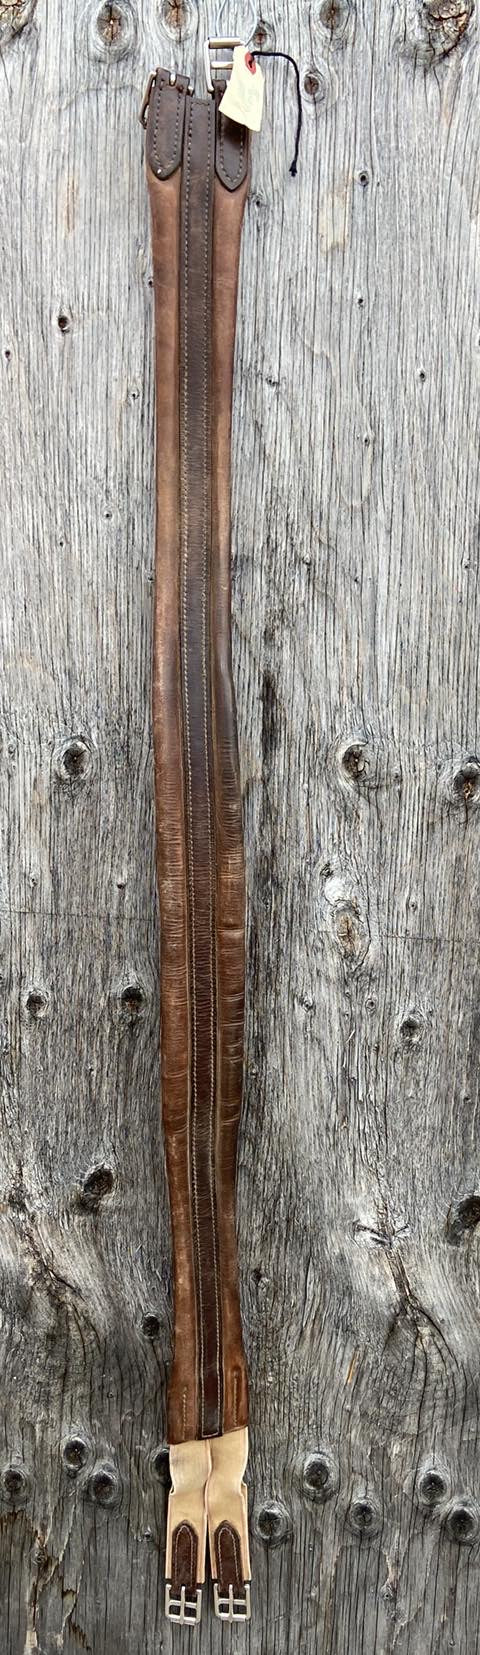 54” older style leather girth